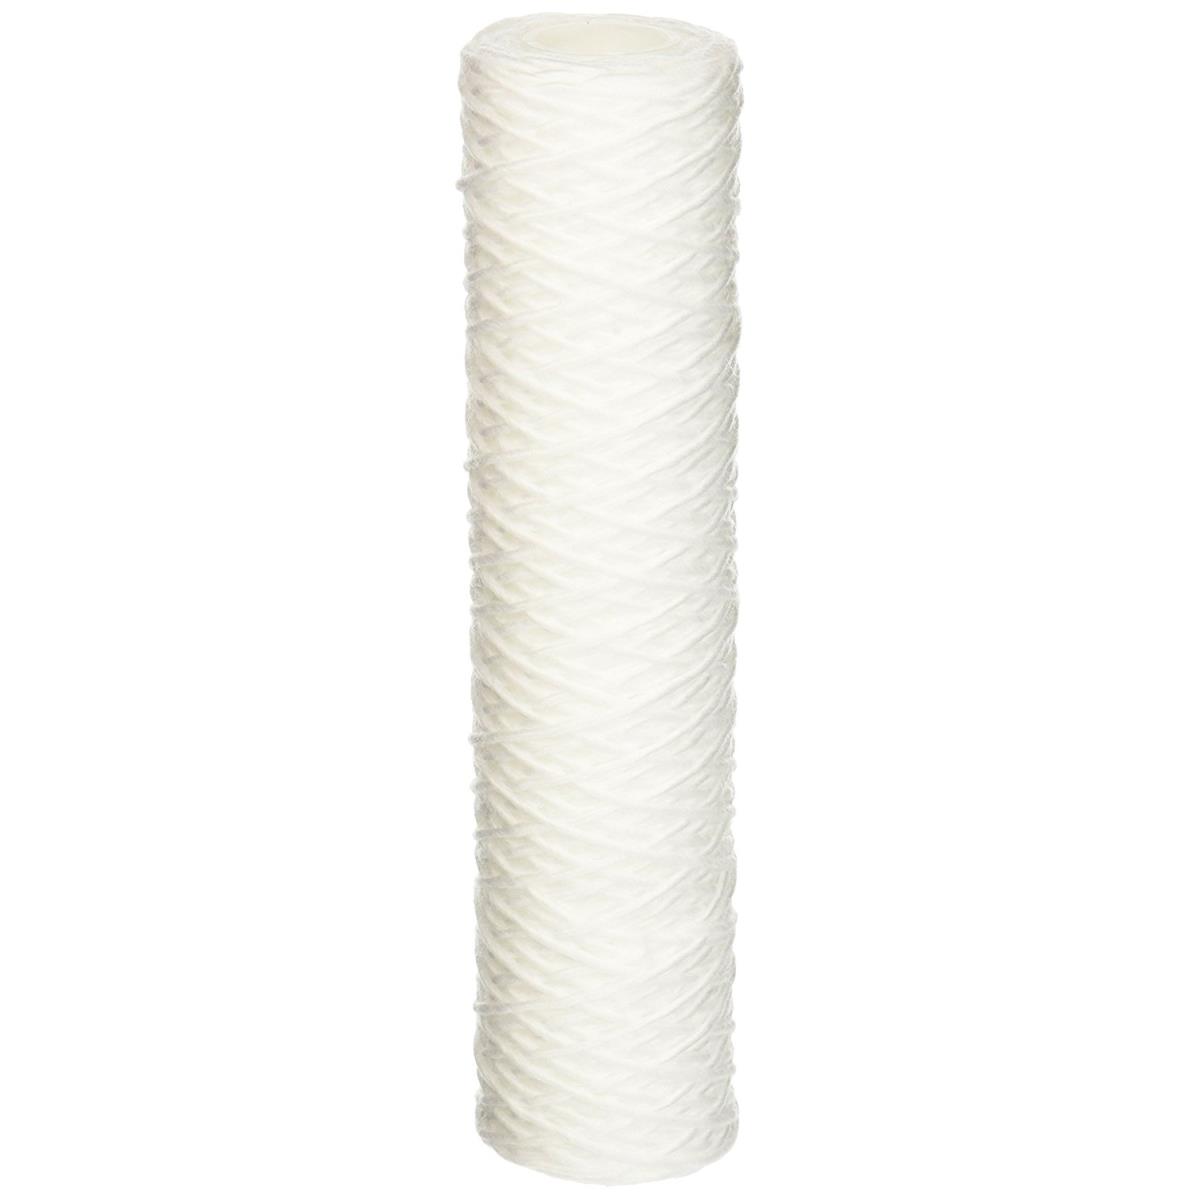 Whole House Sediment Filter Cartridge, 50 Micron - Pack Of 2